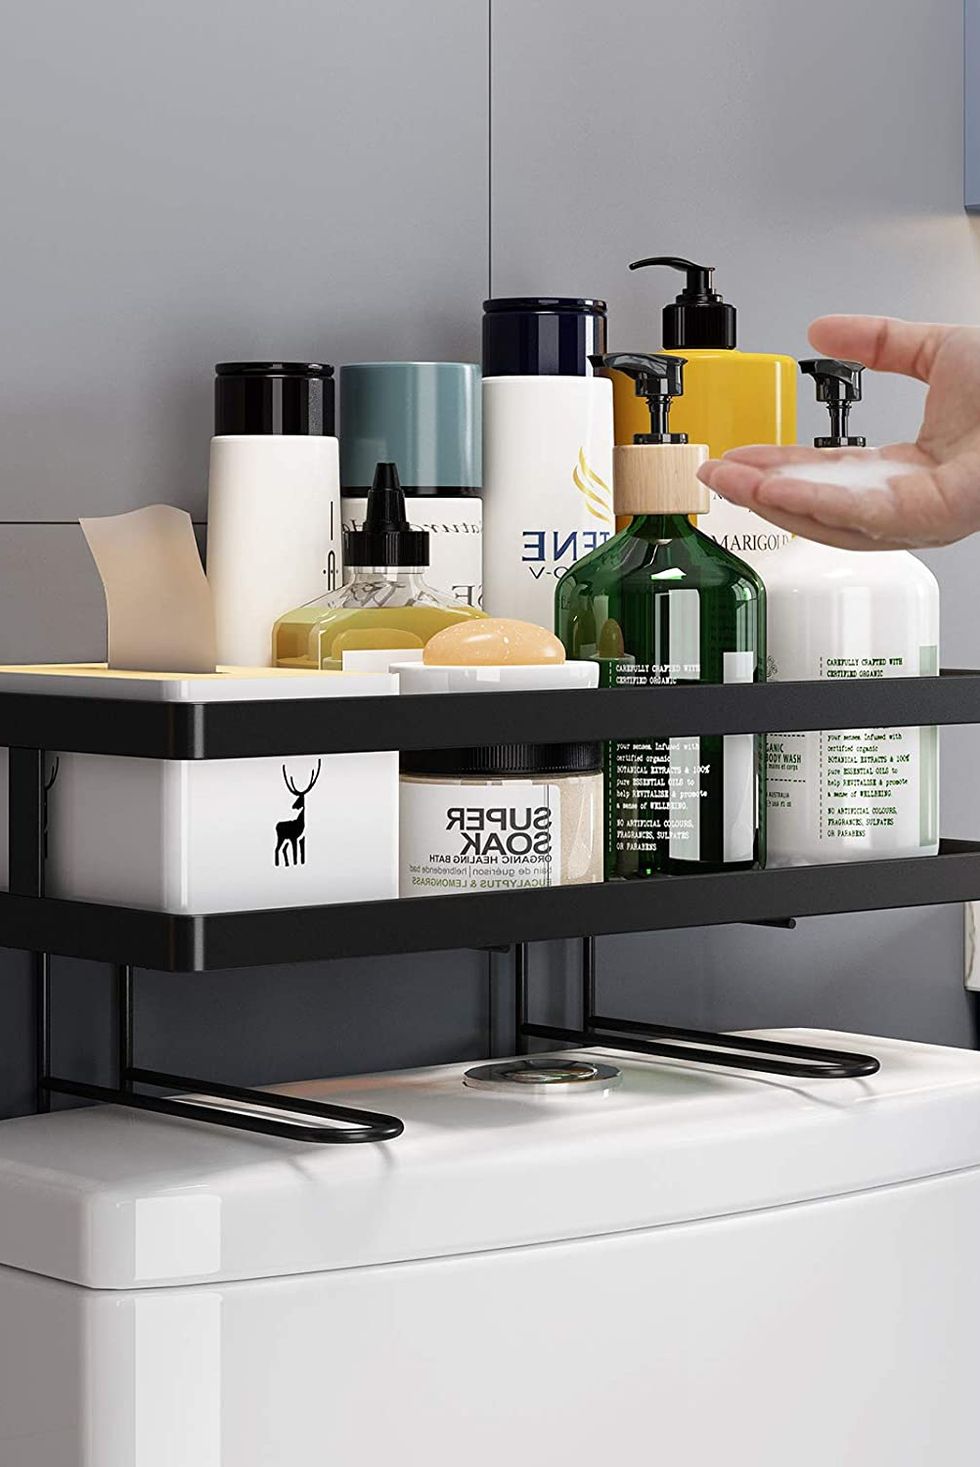 10 Bathroom Organizer Solutions the Pros Stand Behind